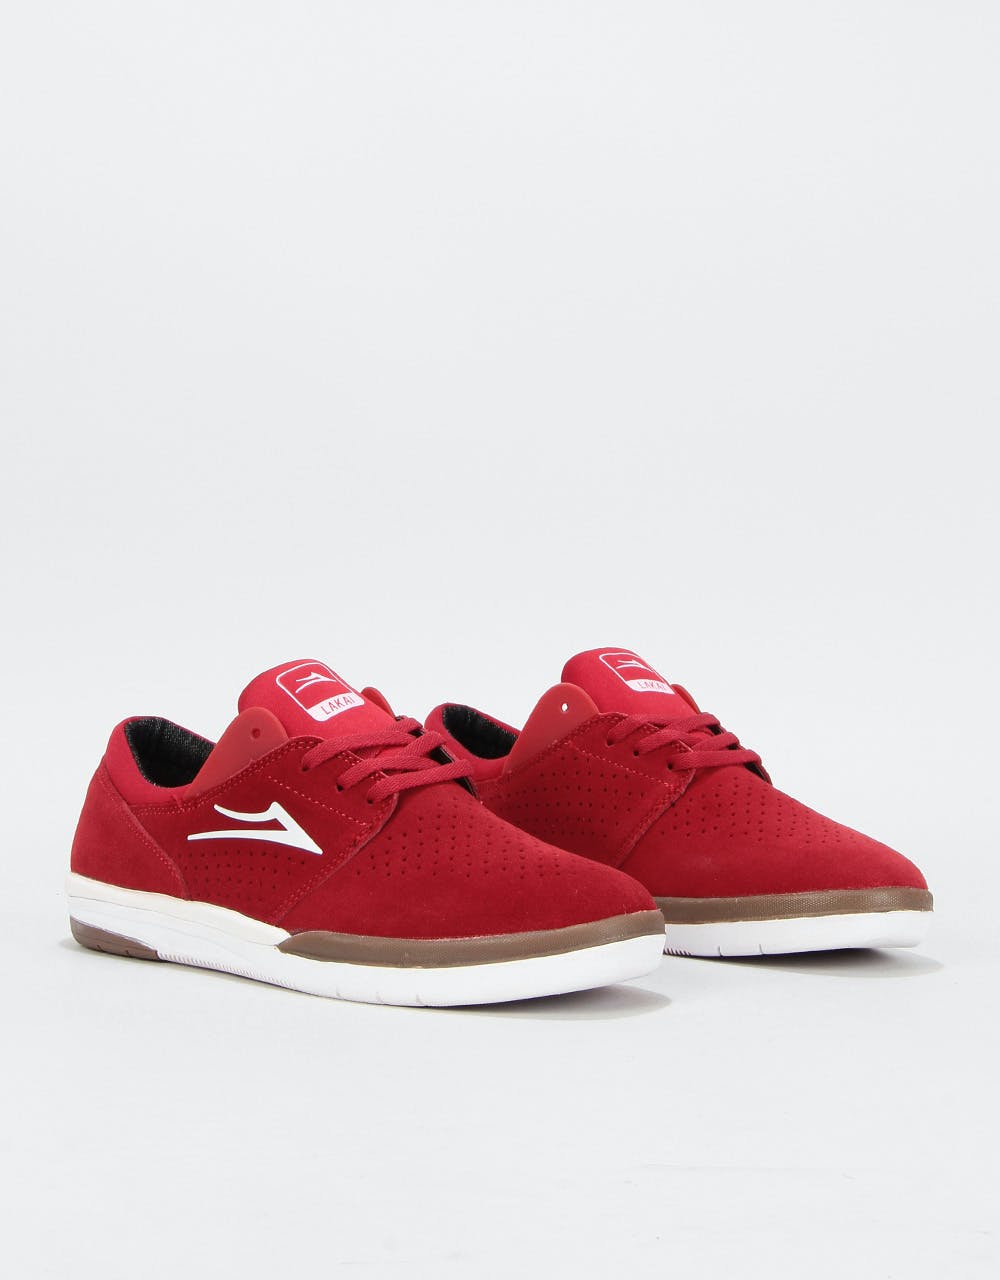 Lakai Fremont Skate Shoes - Red Suede